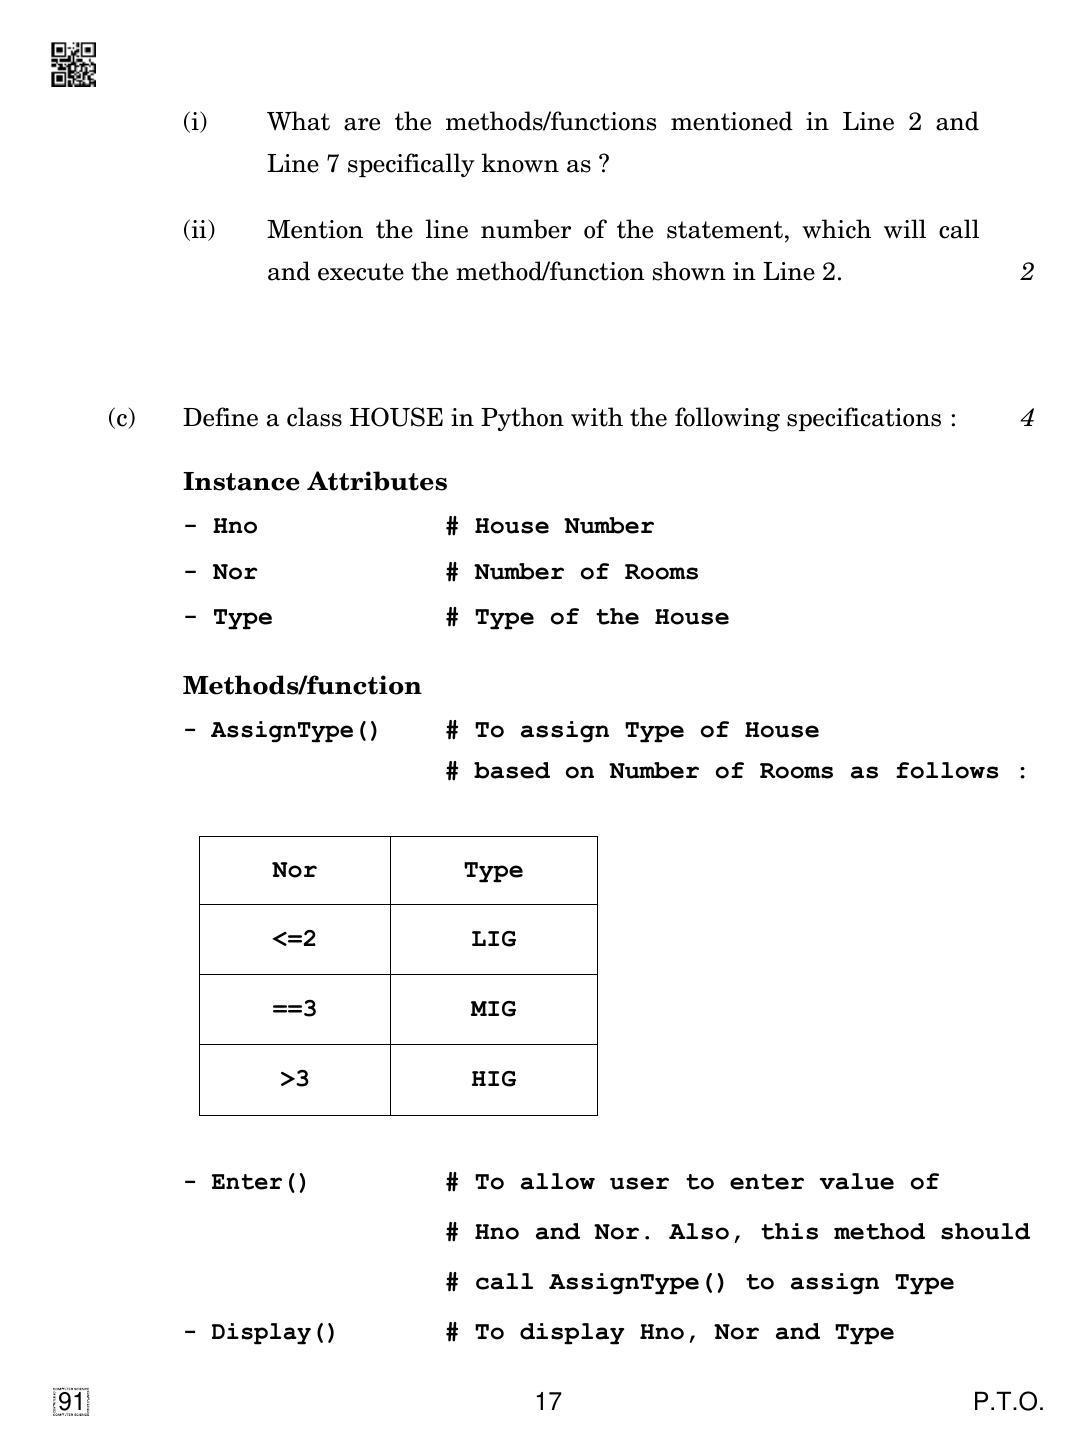 CBSE Class 12 91 Computer Science 2019 Question Paper - Page 17